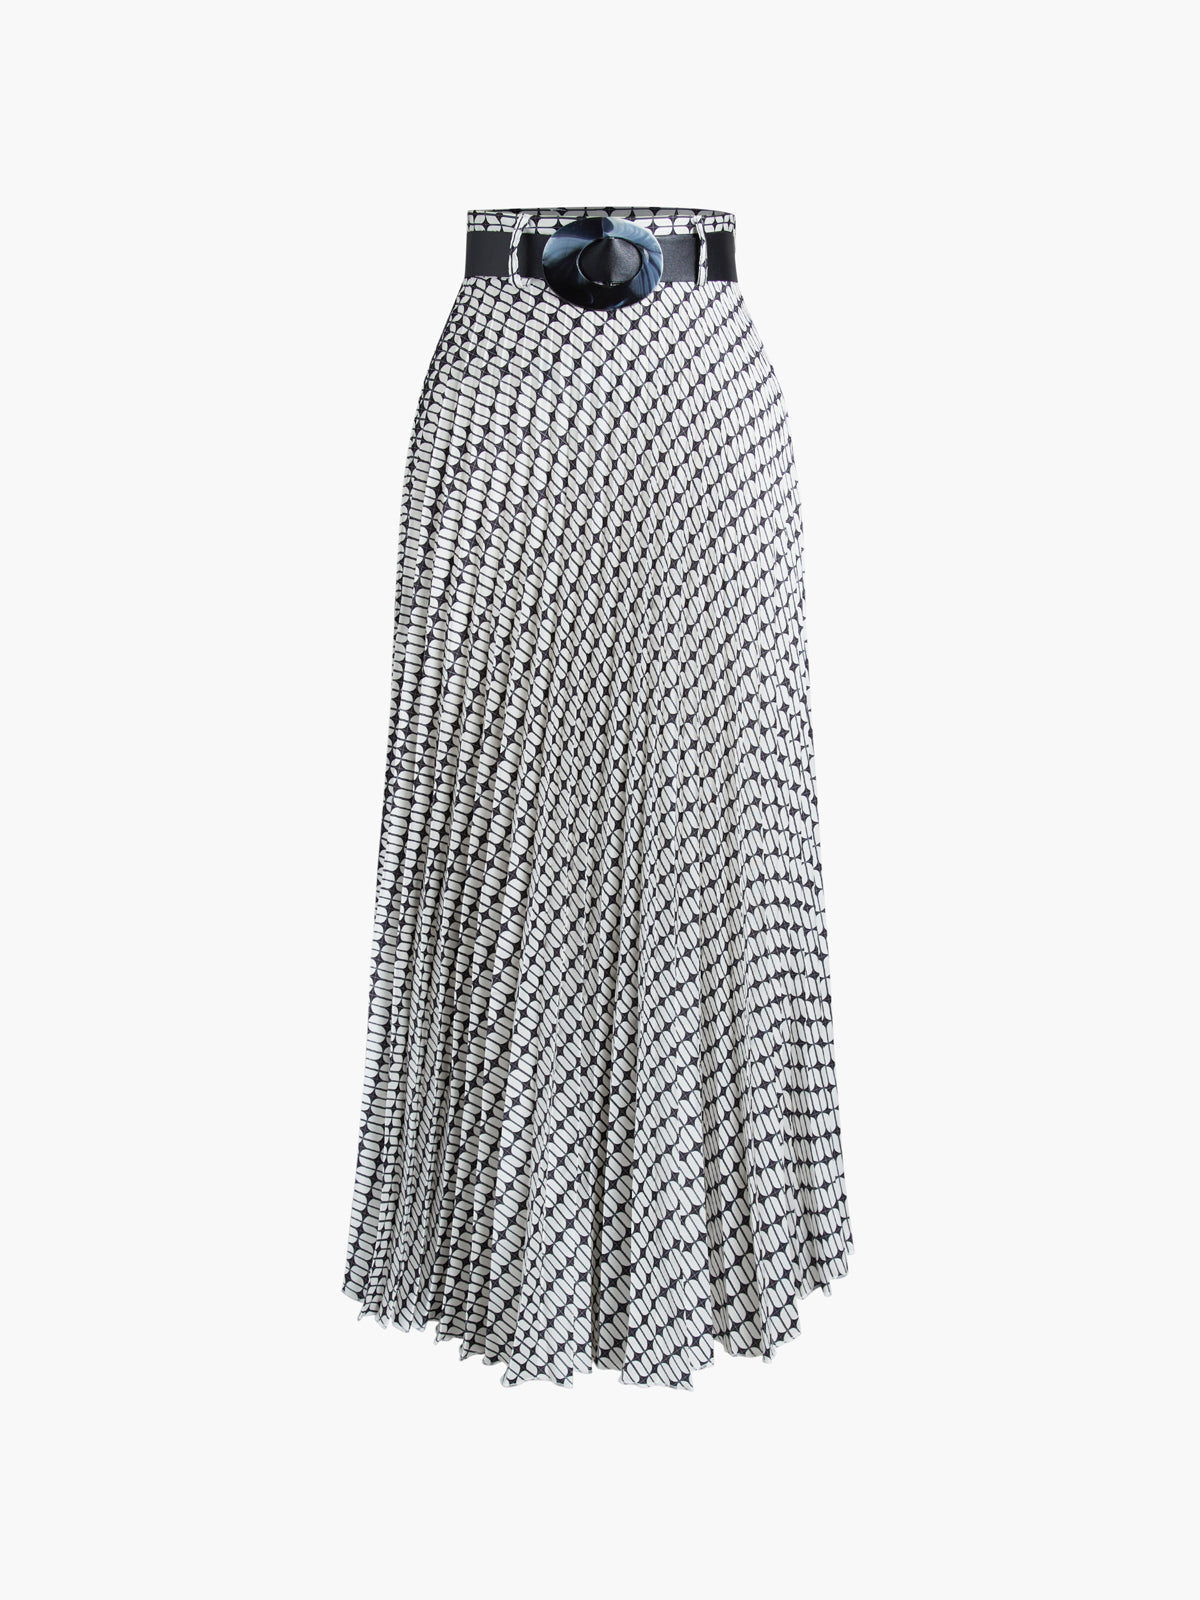 Monogram Pleated Belted Zip Up Maxi Skirt